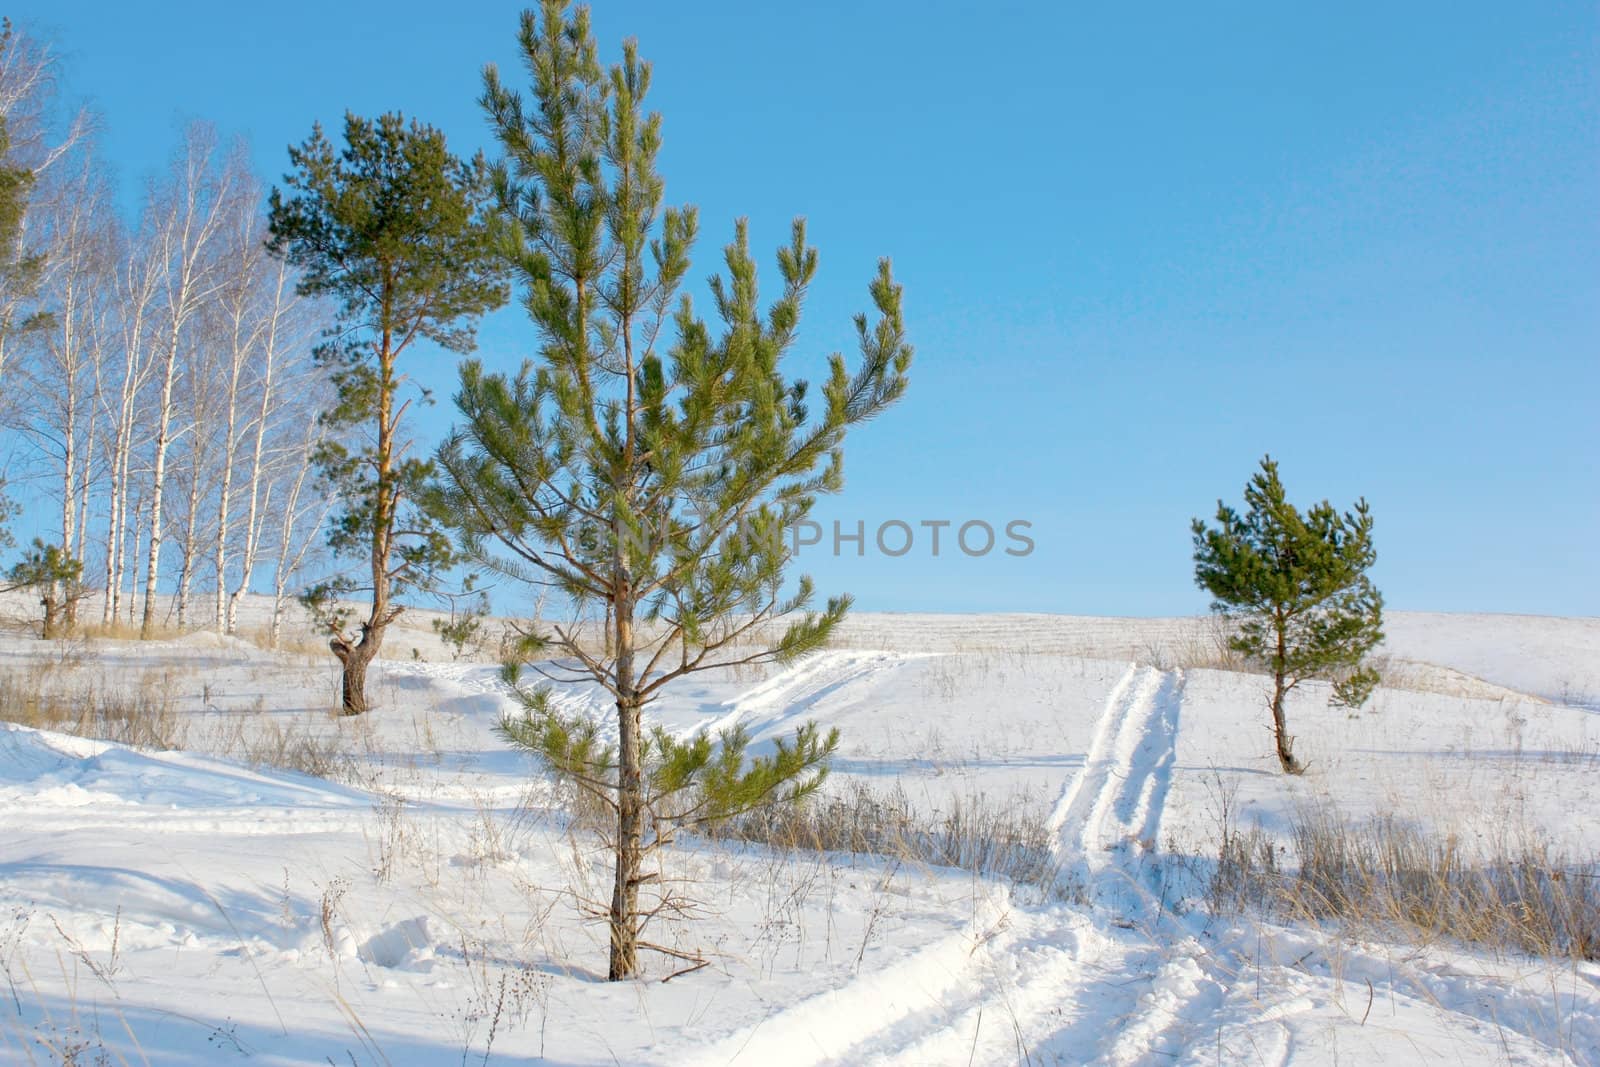 Winter pines on the hill